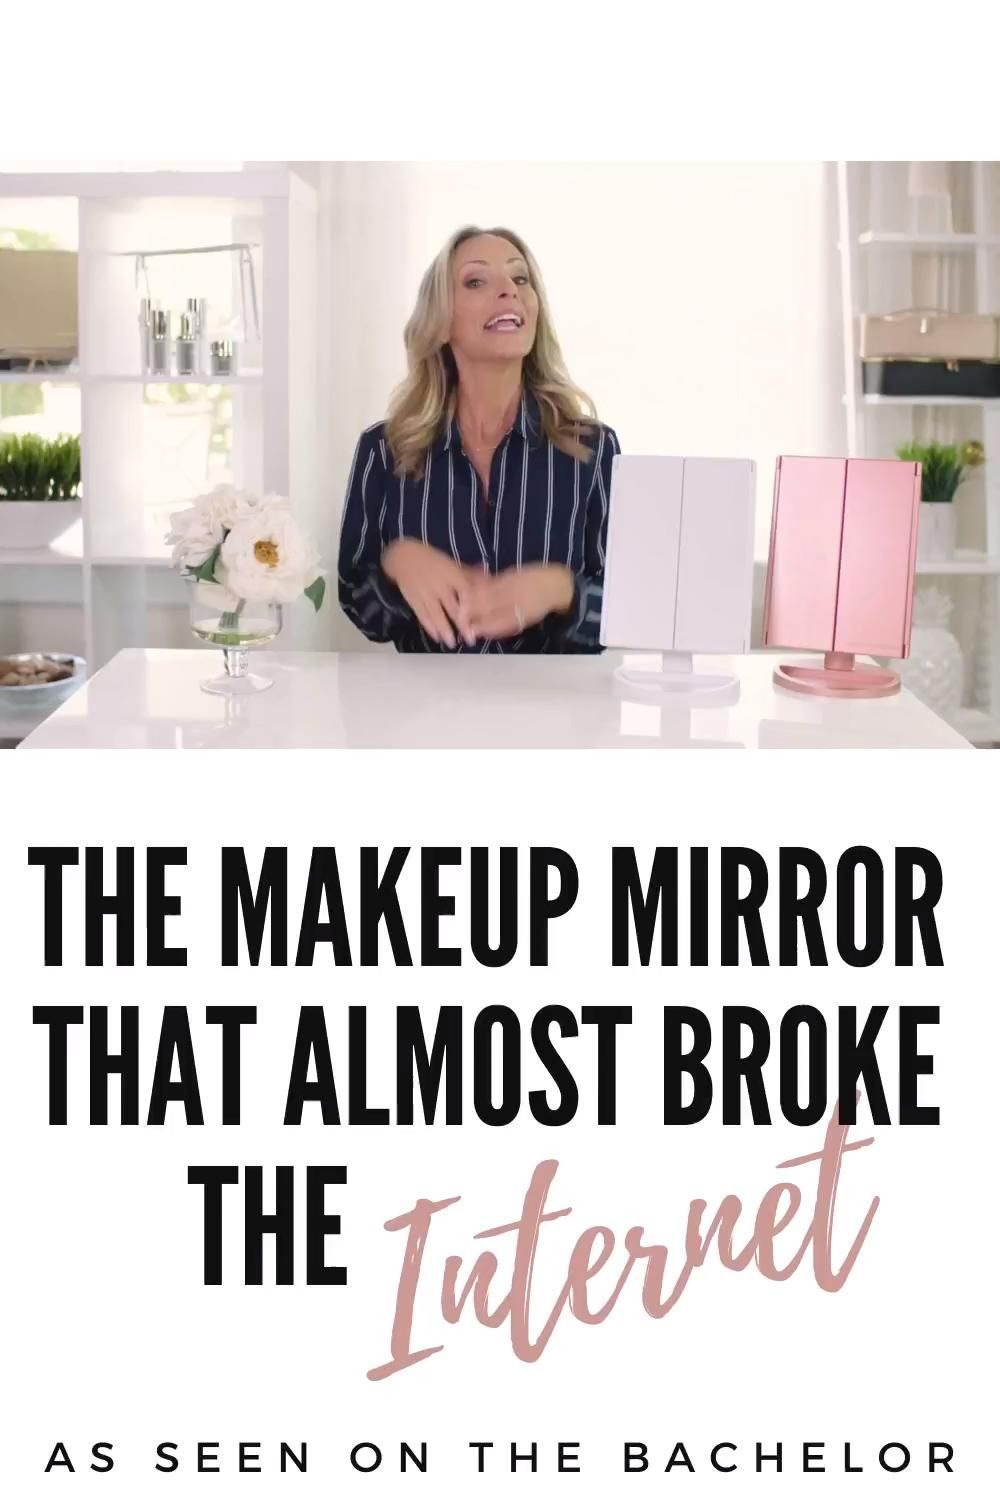 The Makeup Mirror that almost broke the internet. - The Makeup Mirror that almost broke the internet. -   19 beauty Blogger to follow ideas